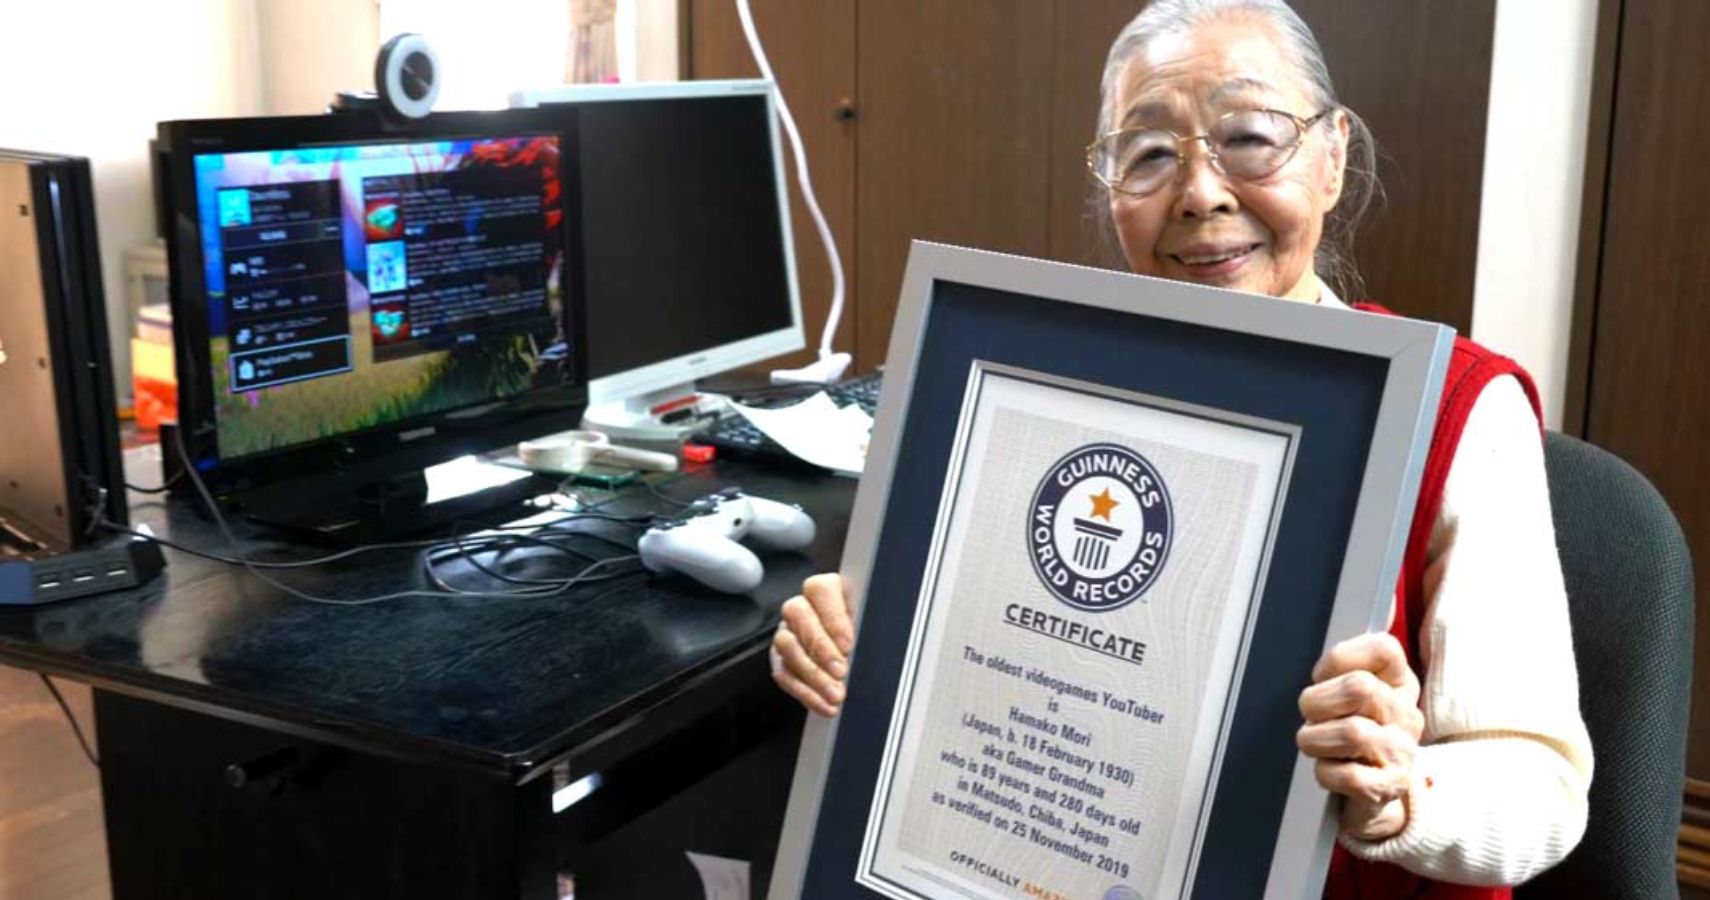 90-year-old who's world's oldest gamer grandma has a special message about  life